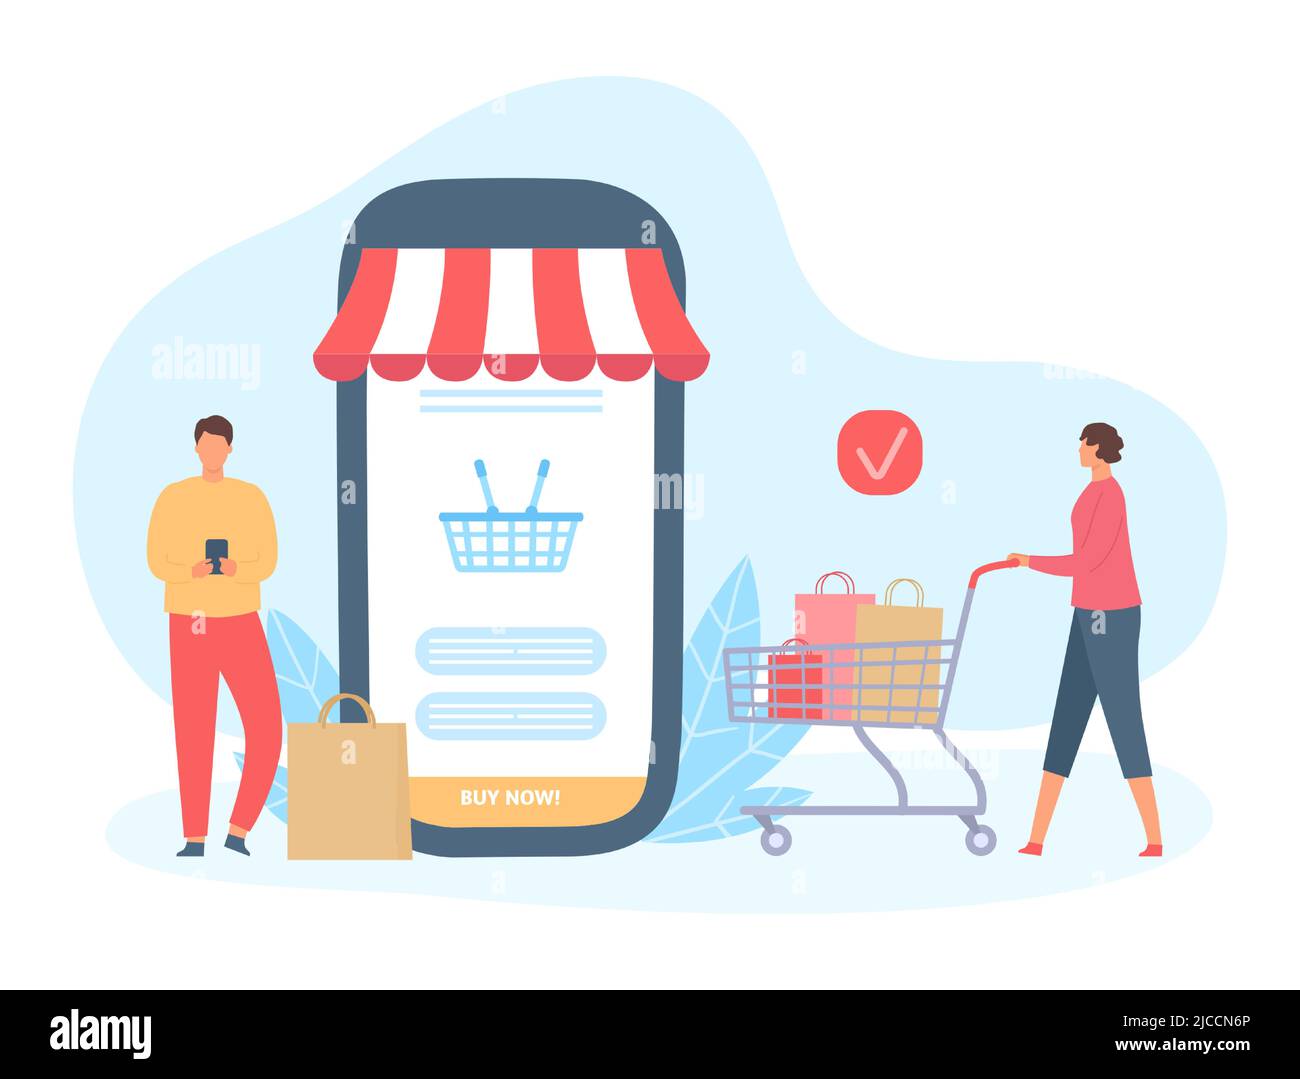 Online shopping. People buying goods using smartphone. Device screen with basket for purchases. Woman with bags Stock Vector